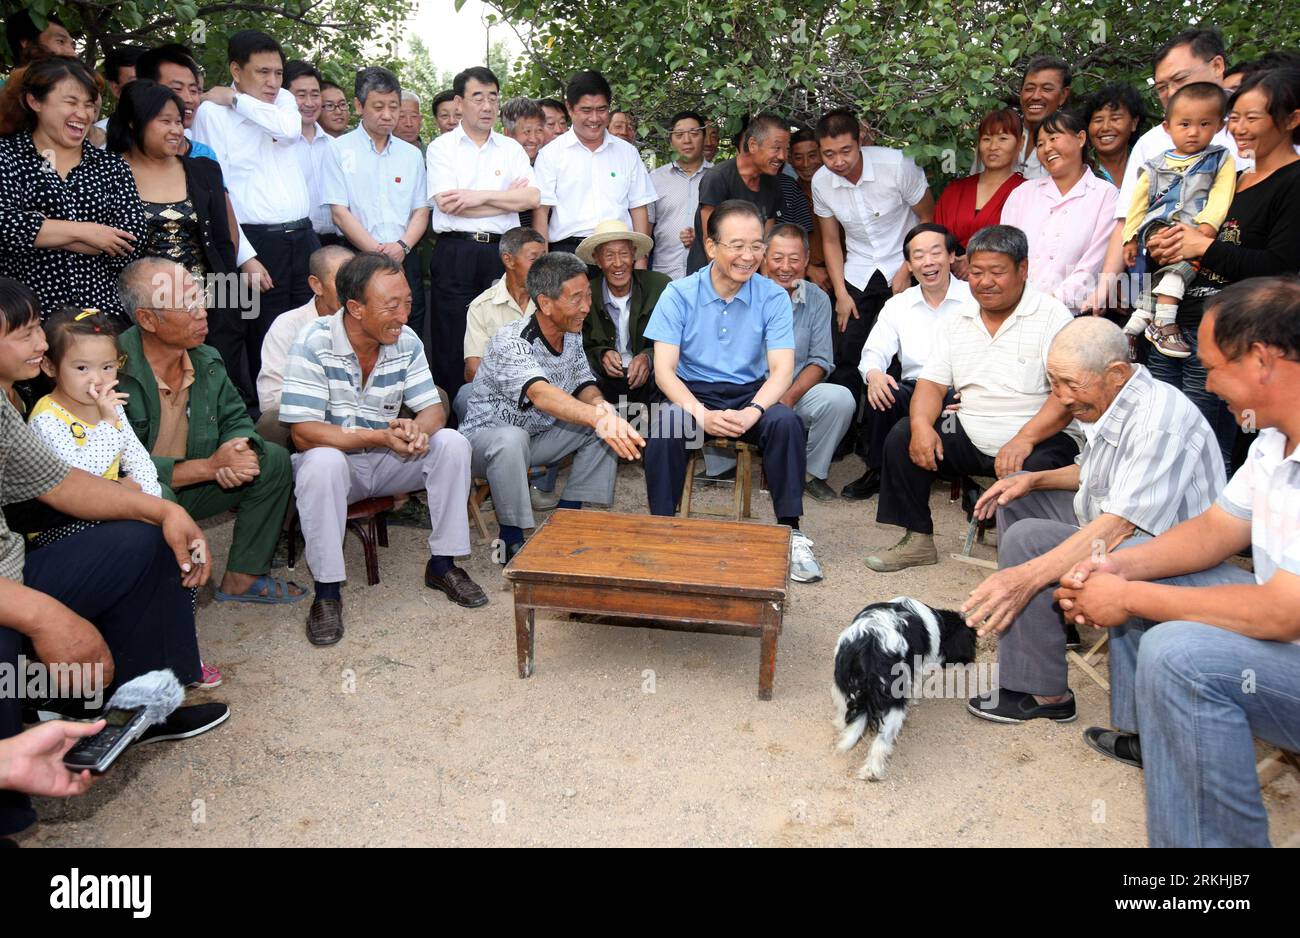 Bildnummer: 55836232  Datum: 26.08.2011  Copyright: imago/Xinhua (110828) -- SHIJIAZHUANG, Aug. 28, 2011 (Xinhua) -- Chinese Premier Wen Jiabao (C front) talks with local farmers in Huojiafang Village of Zhangjiakou City, north China s Hebei Province, Aug. 26, 2011. Wen paid an inspection tour to Zhangjiakou City of north China s Hebei Province from Firday to Sunday. During his tour, Wen visited farmers, milk companies, inspected agricultural bases and held a meeting on agricultural production and rural work. (Xinhua/Yao Dawei) (zgp) CHINA-HEBEI-ZHANGJIAKOU-WEN JIABAO-INSPECTION (CN) PUBLICATI Stock Photo